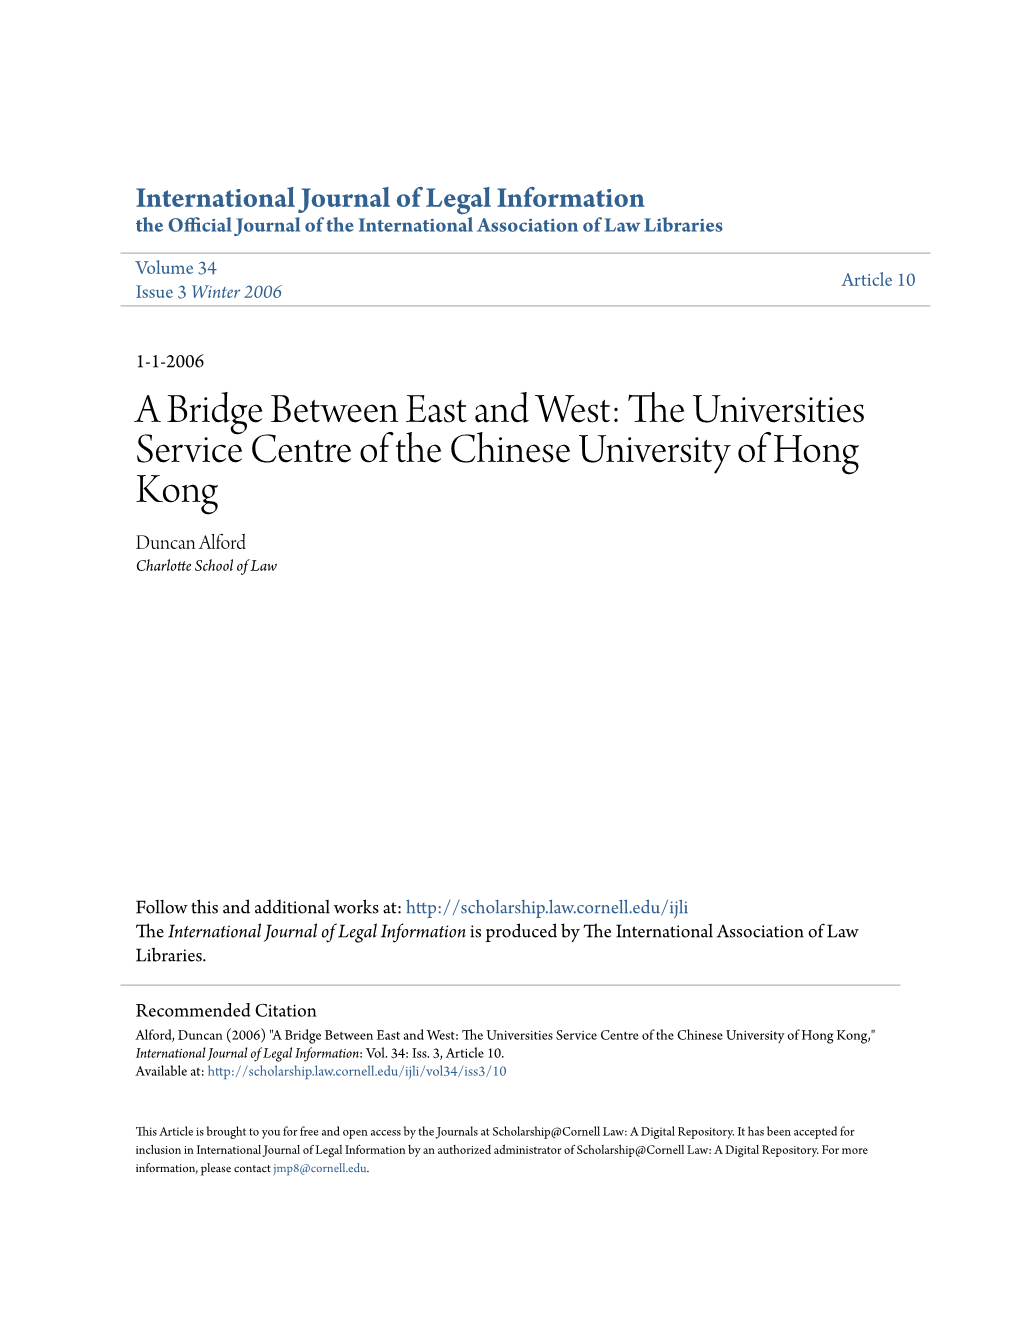 A Bridge Between East and West: the Universities Service Centre of the Chinese University of Hong Kong